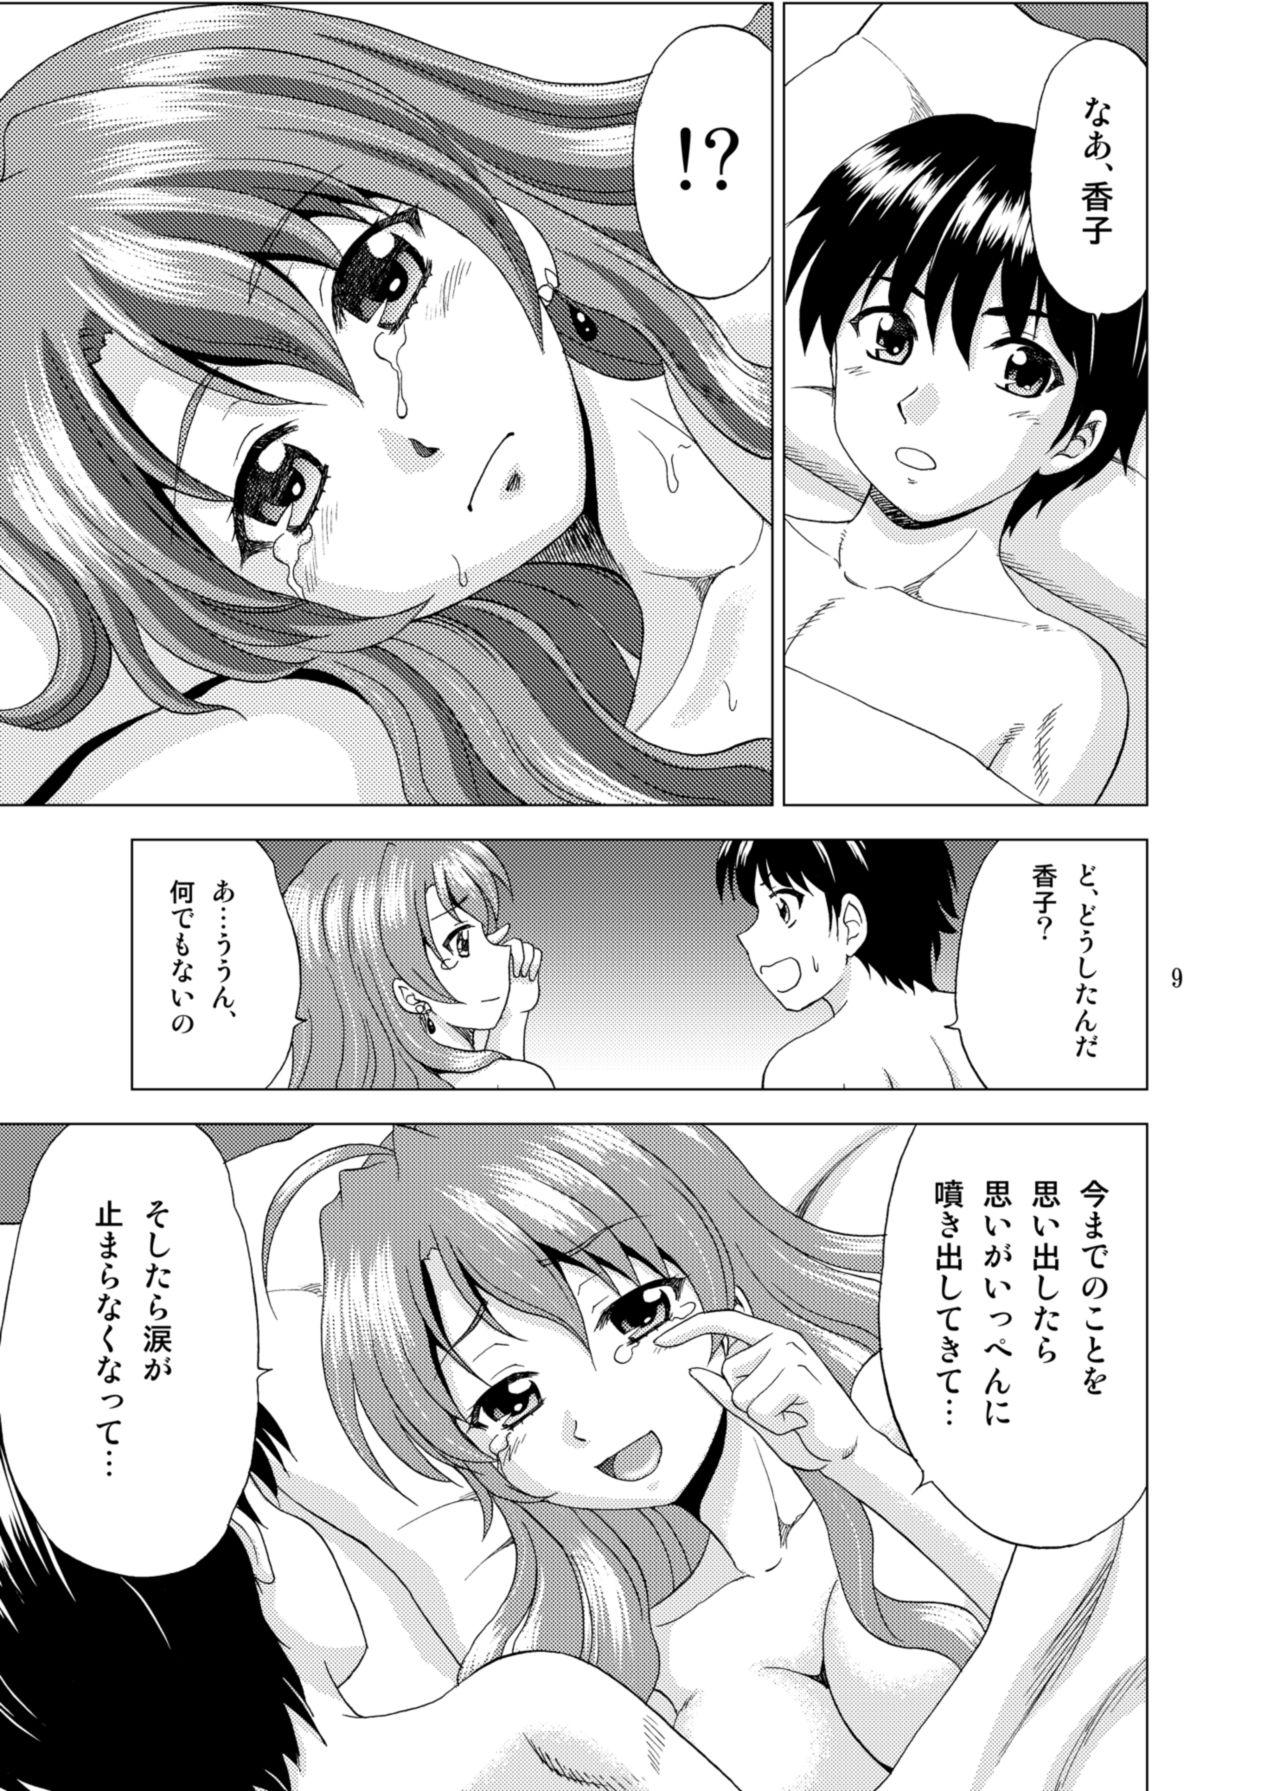 4some Golden Body - Golden time Gay Solo - Page 9